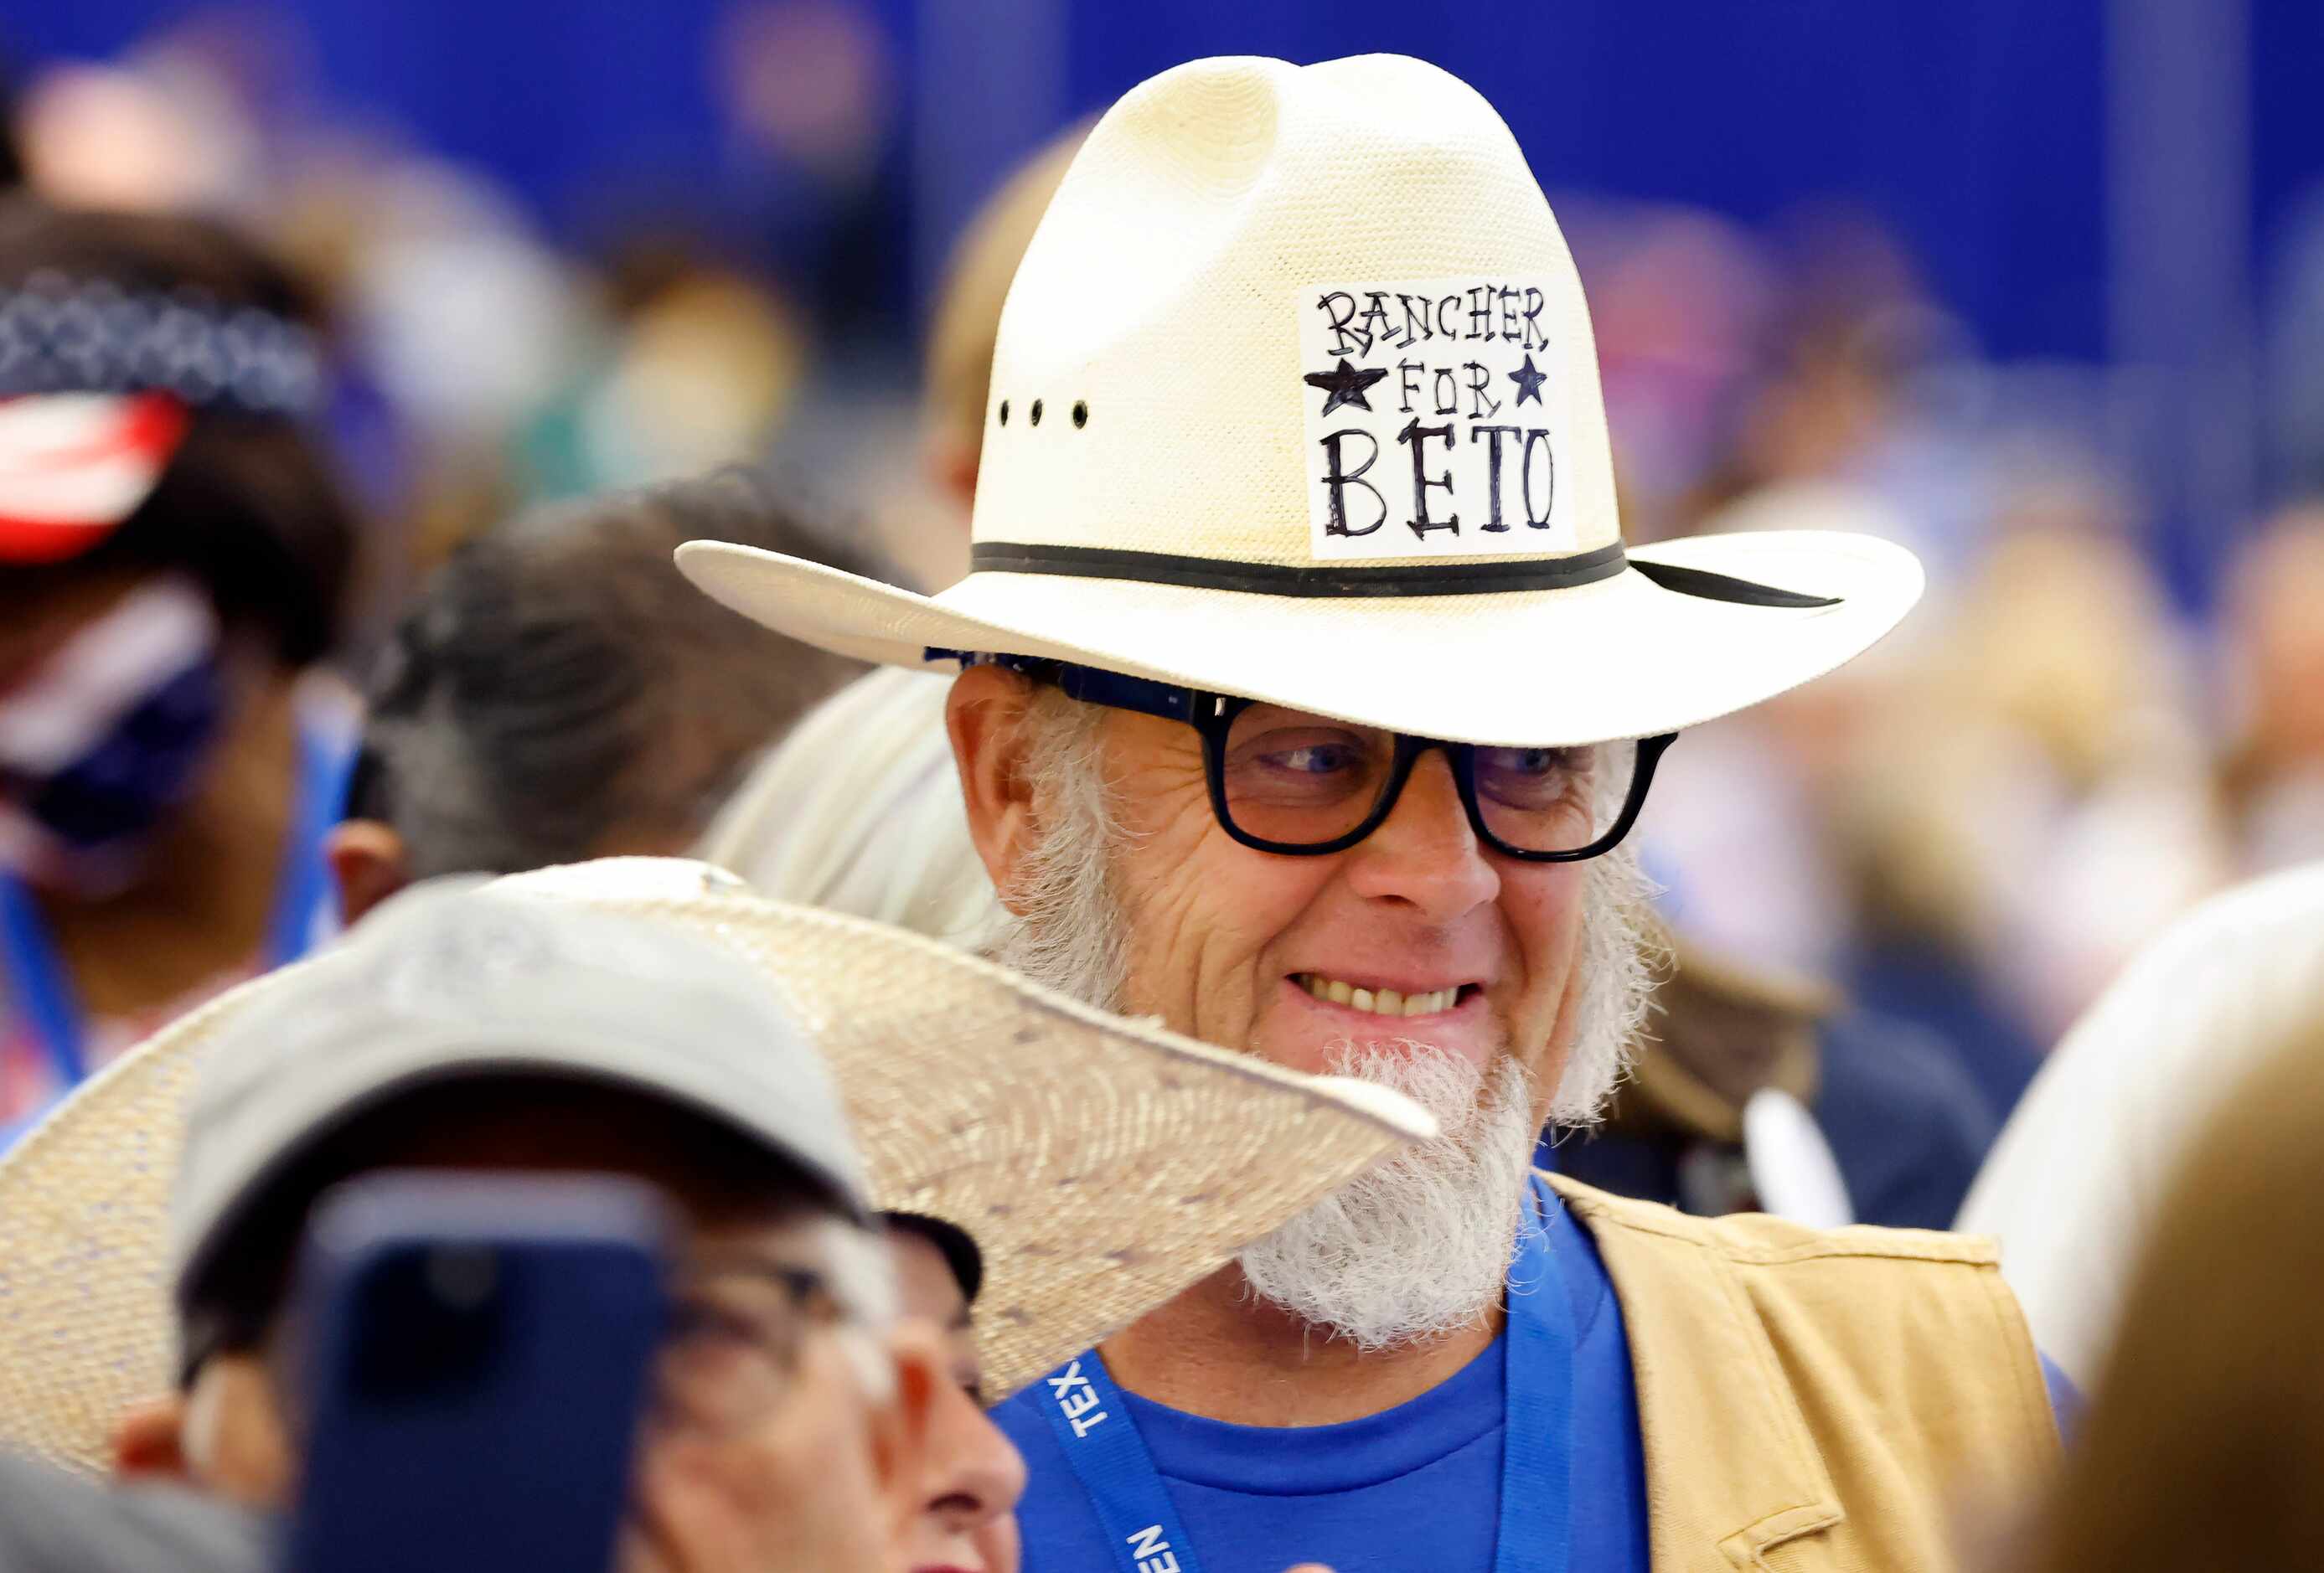 Wearing a Ranchers for Beto cowboy hat, Andy Don Emmons of Waxahachie, Texas waits in line...